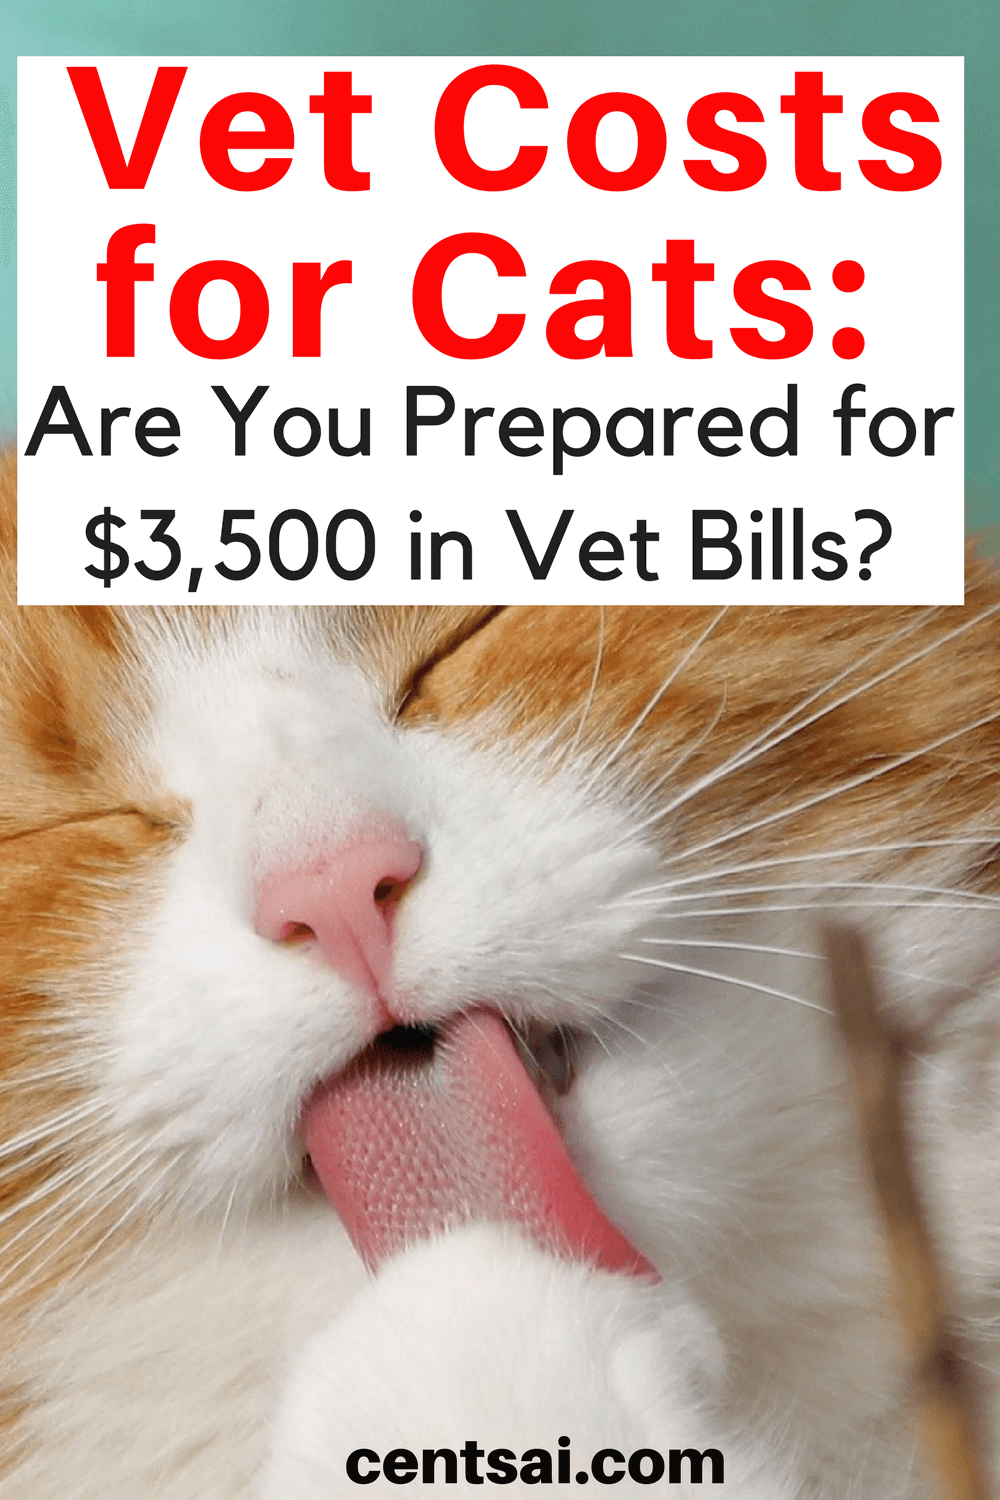 Vet bills can add up fast. One cat owner realized that the hard way when she received a $3,500 emergency vet bill. Here's what she learned.